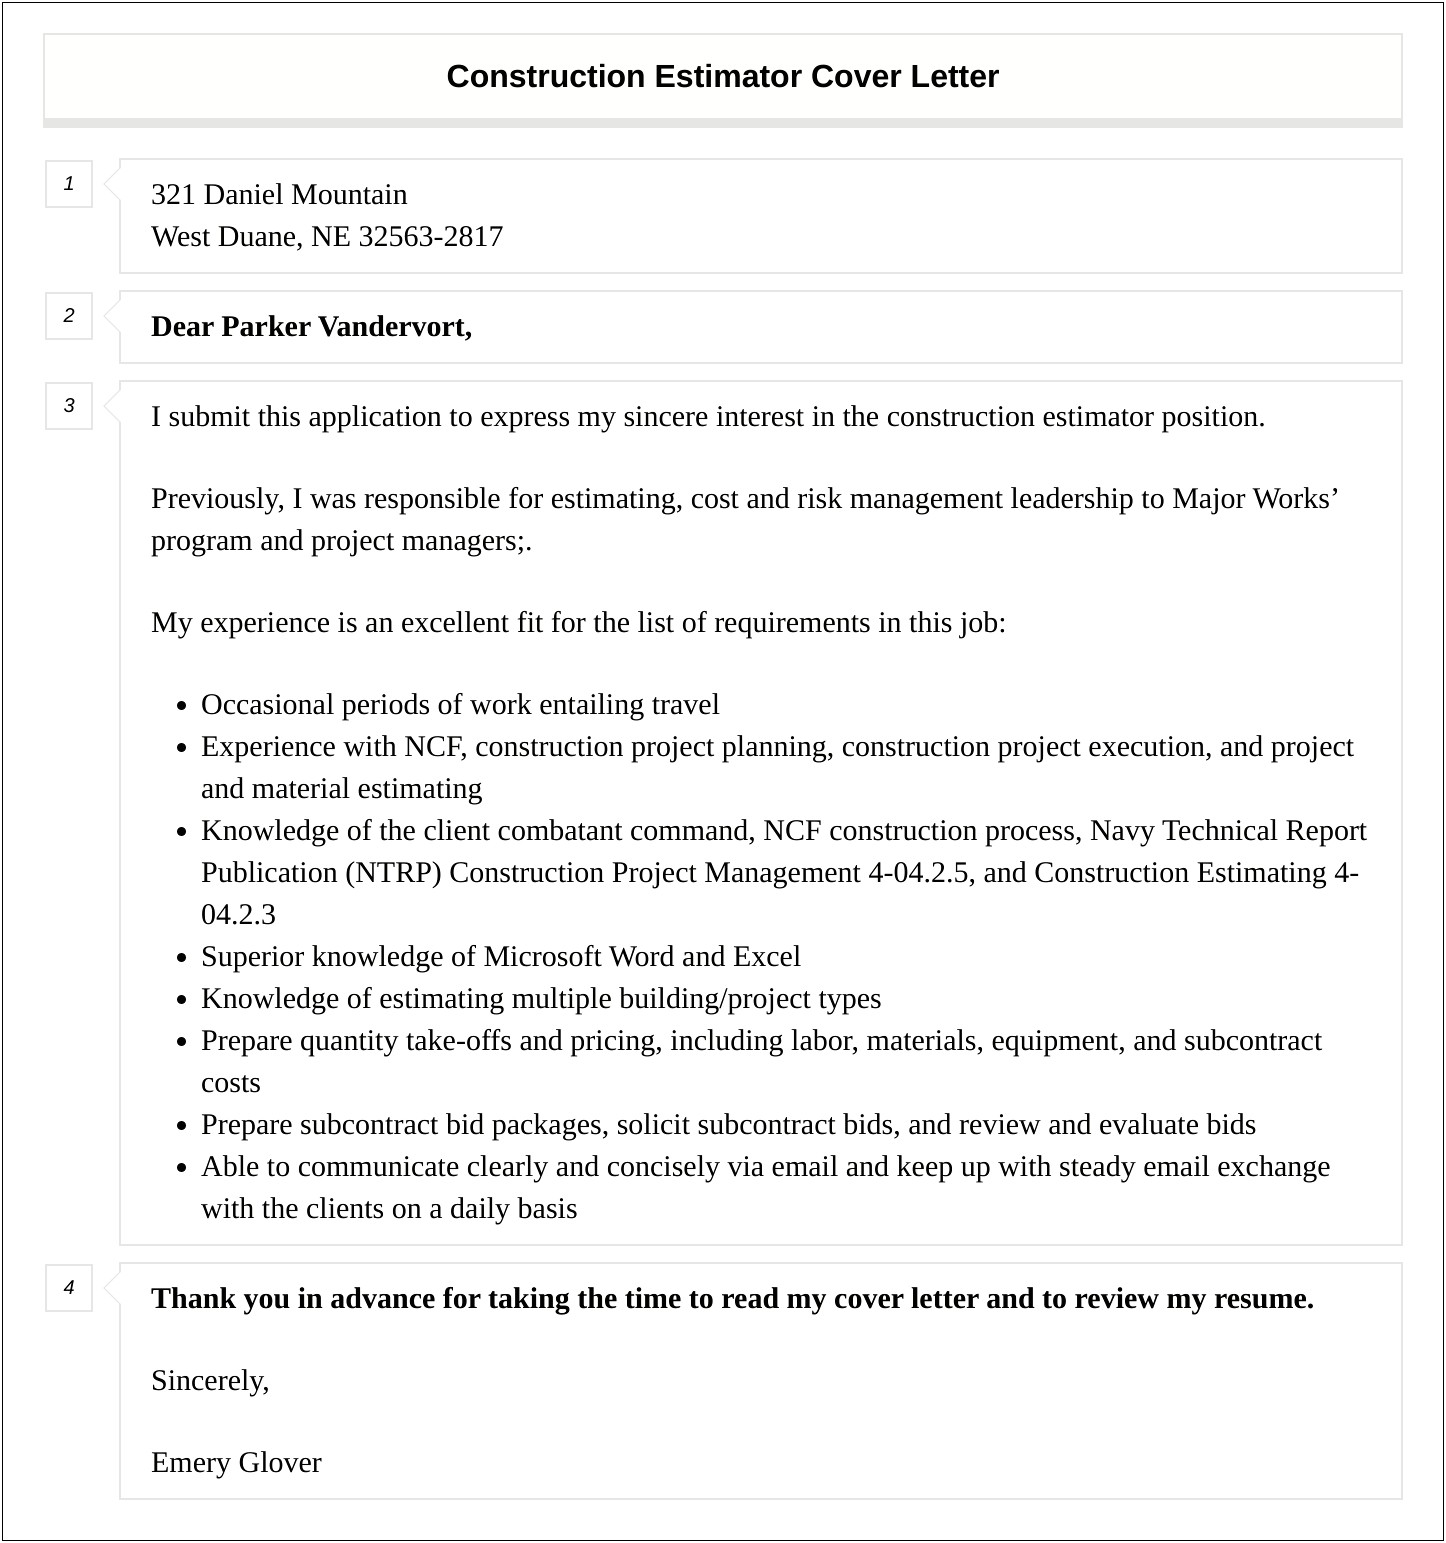 Resume Cover Letter For Project Estimator